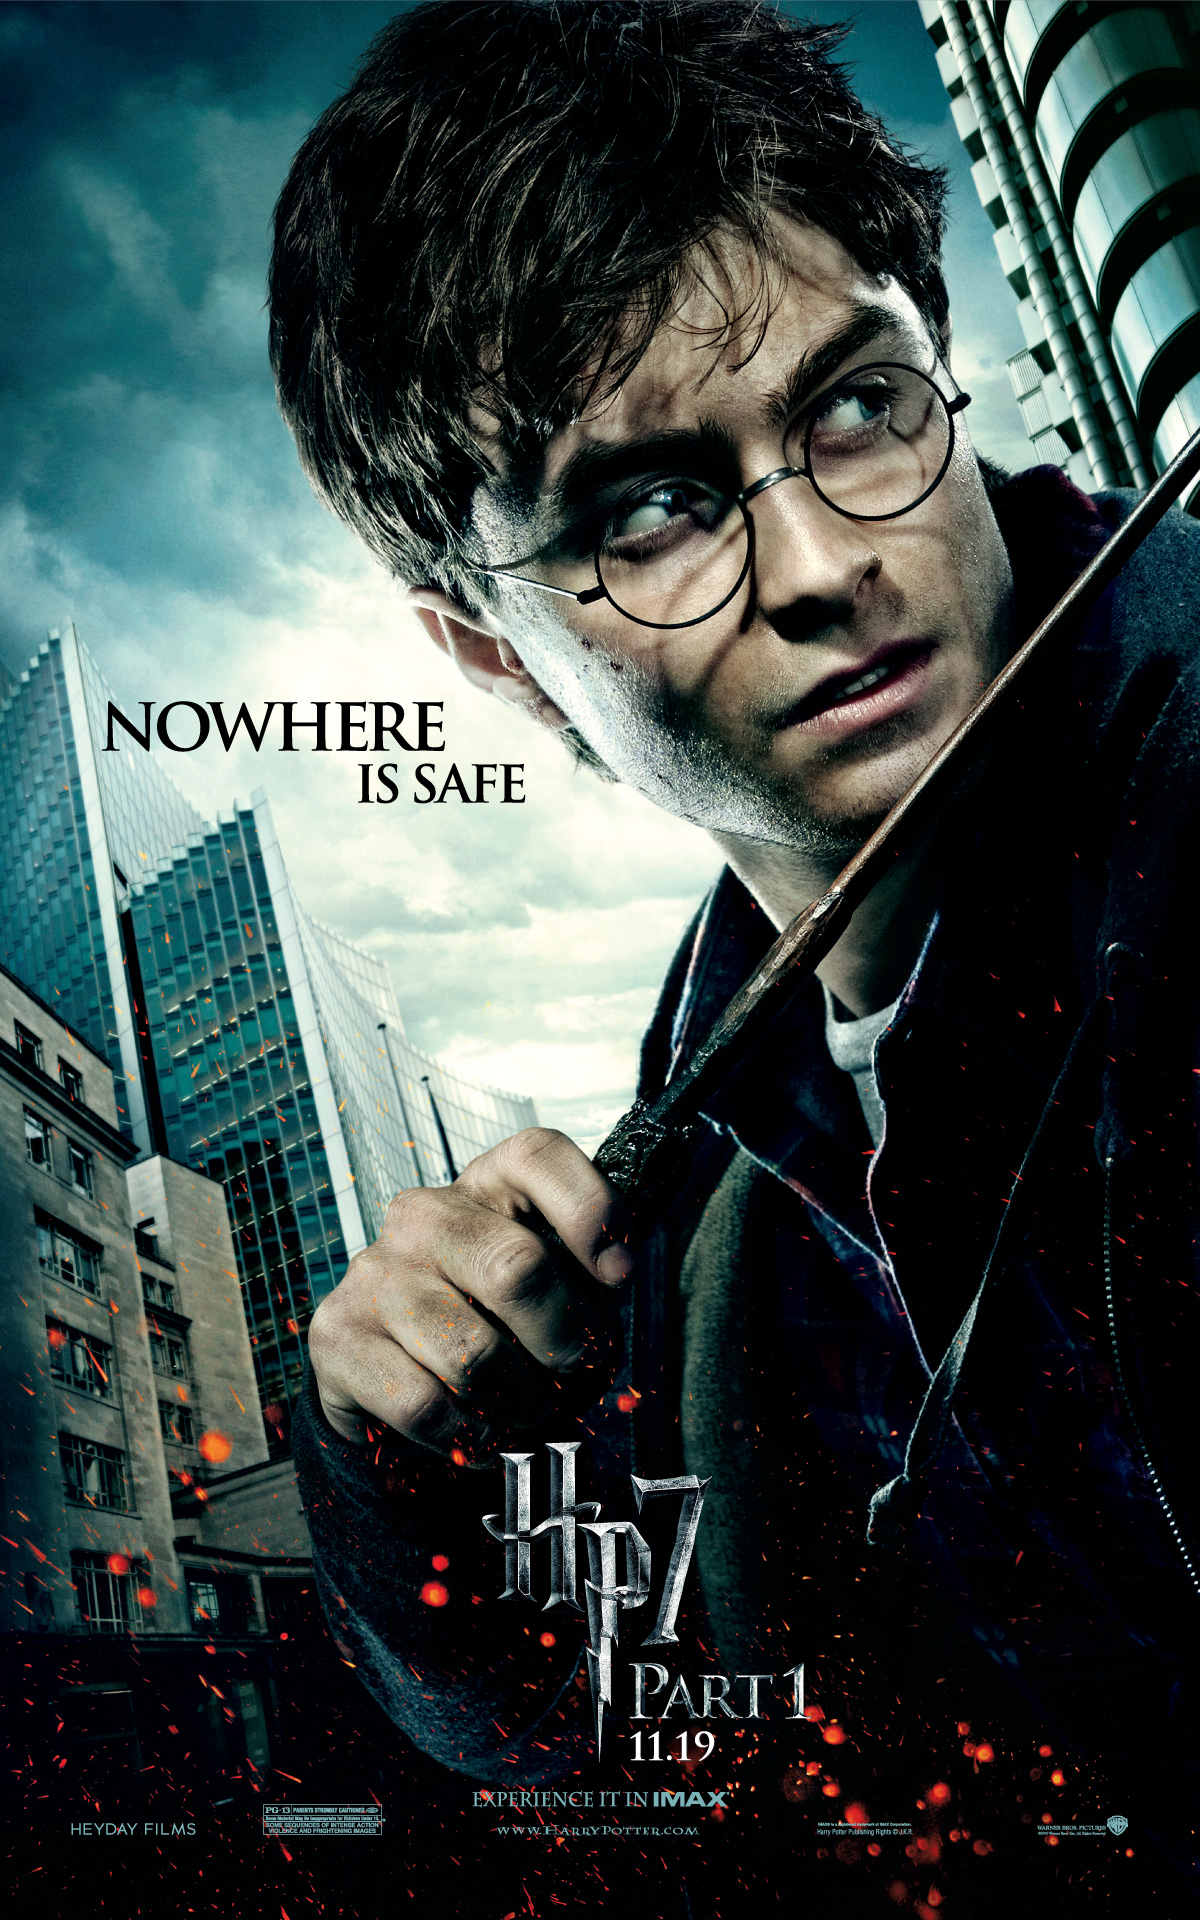 Harry Potter And The Deathly Hallows: Part 1 #6